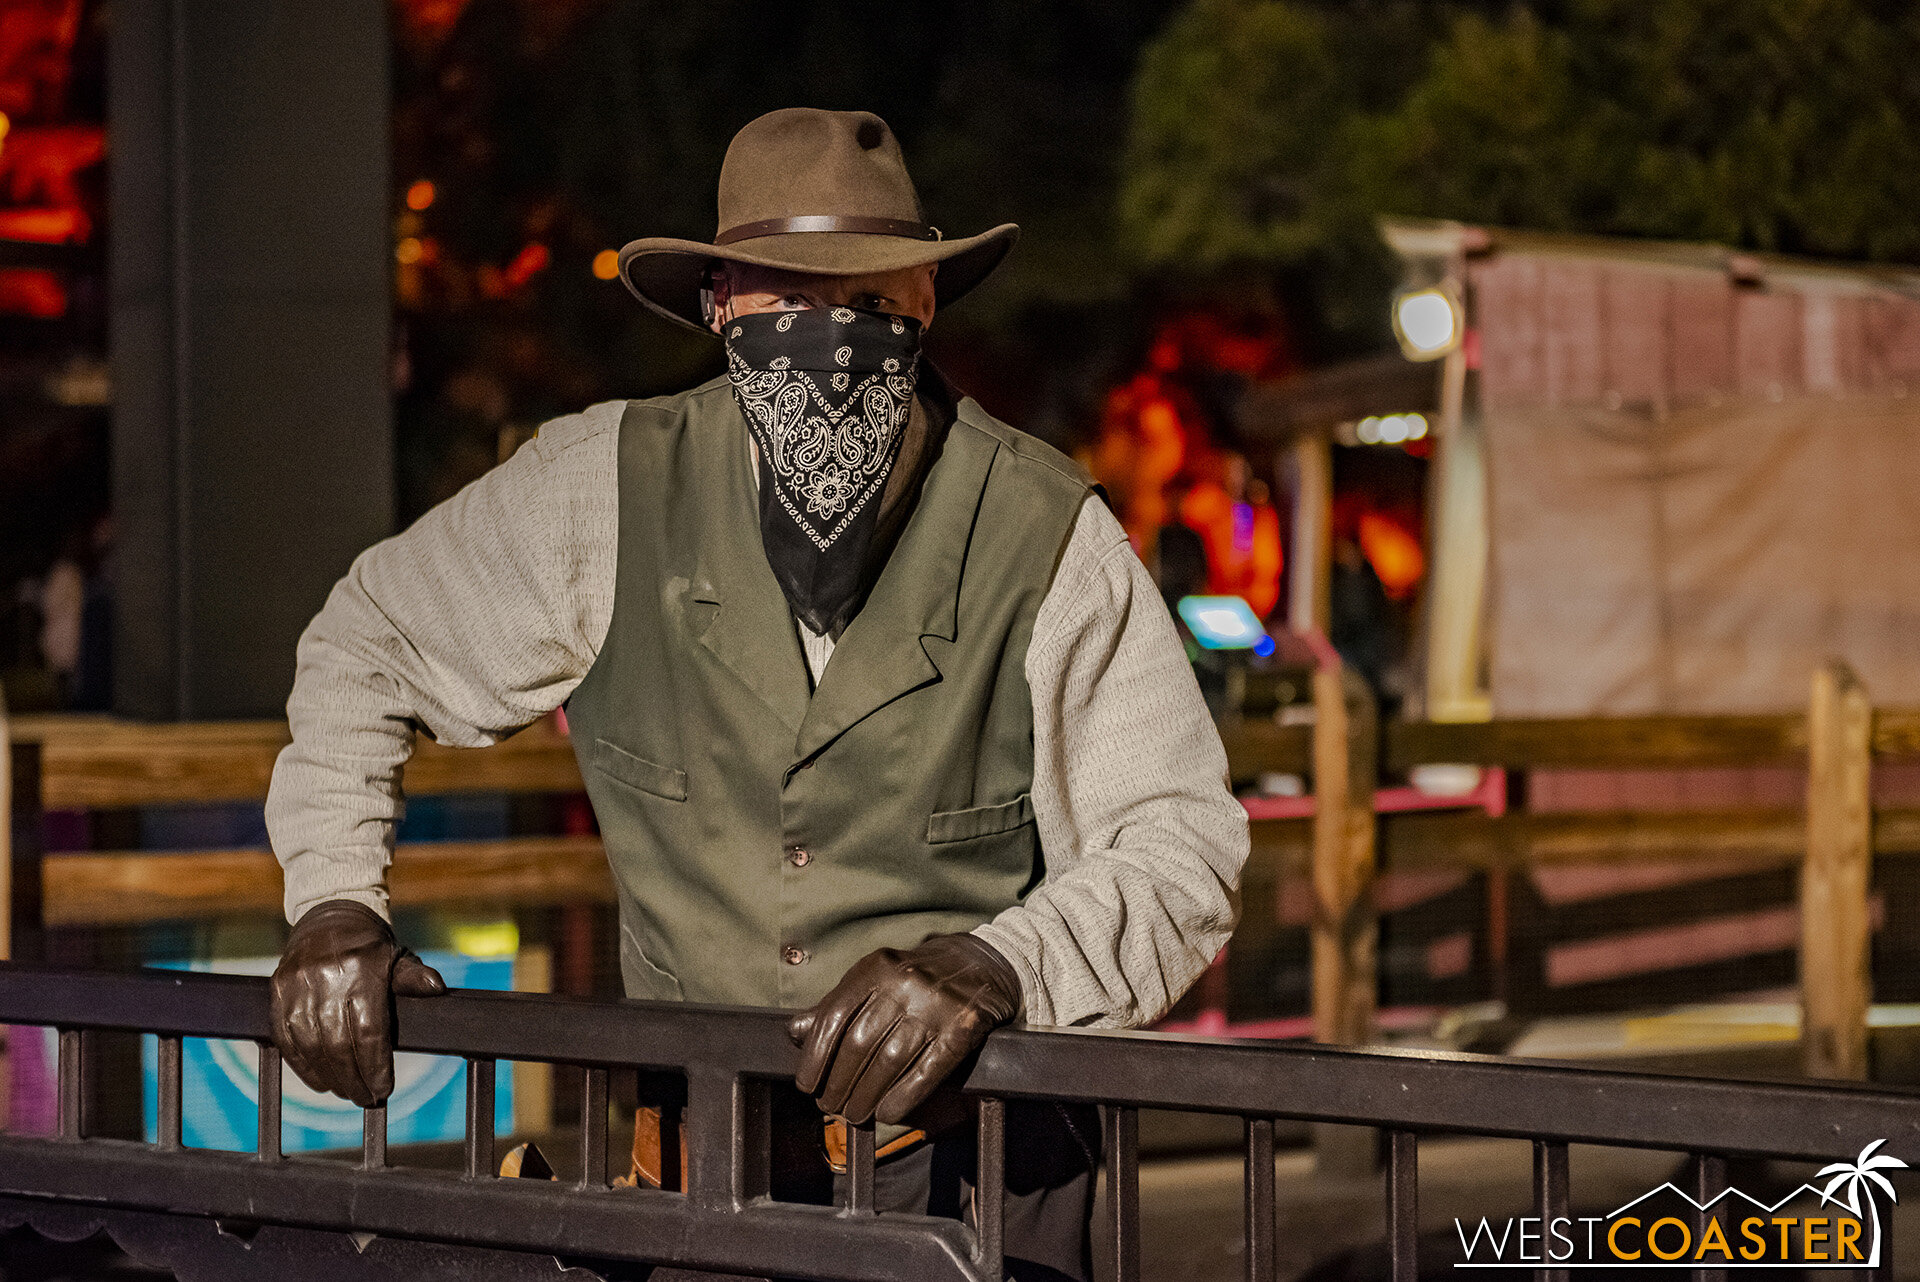  A bandit watches guests pass by the Calico Railroad. 